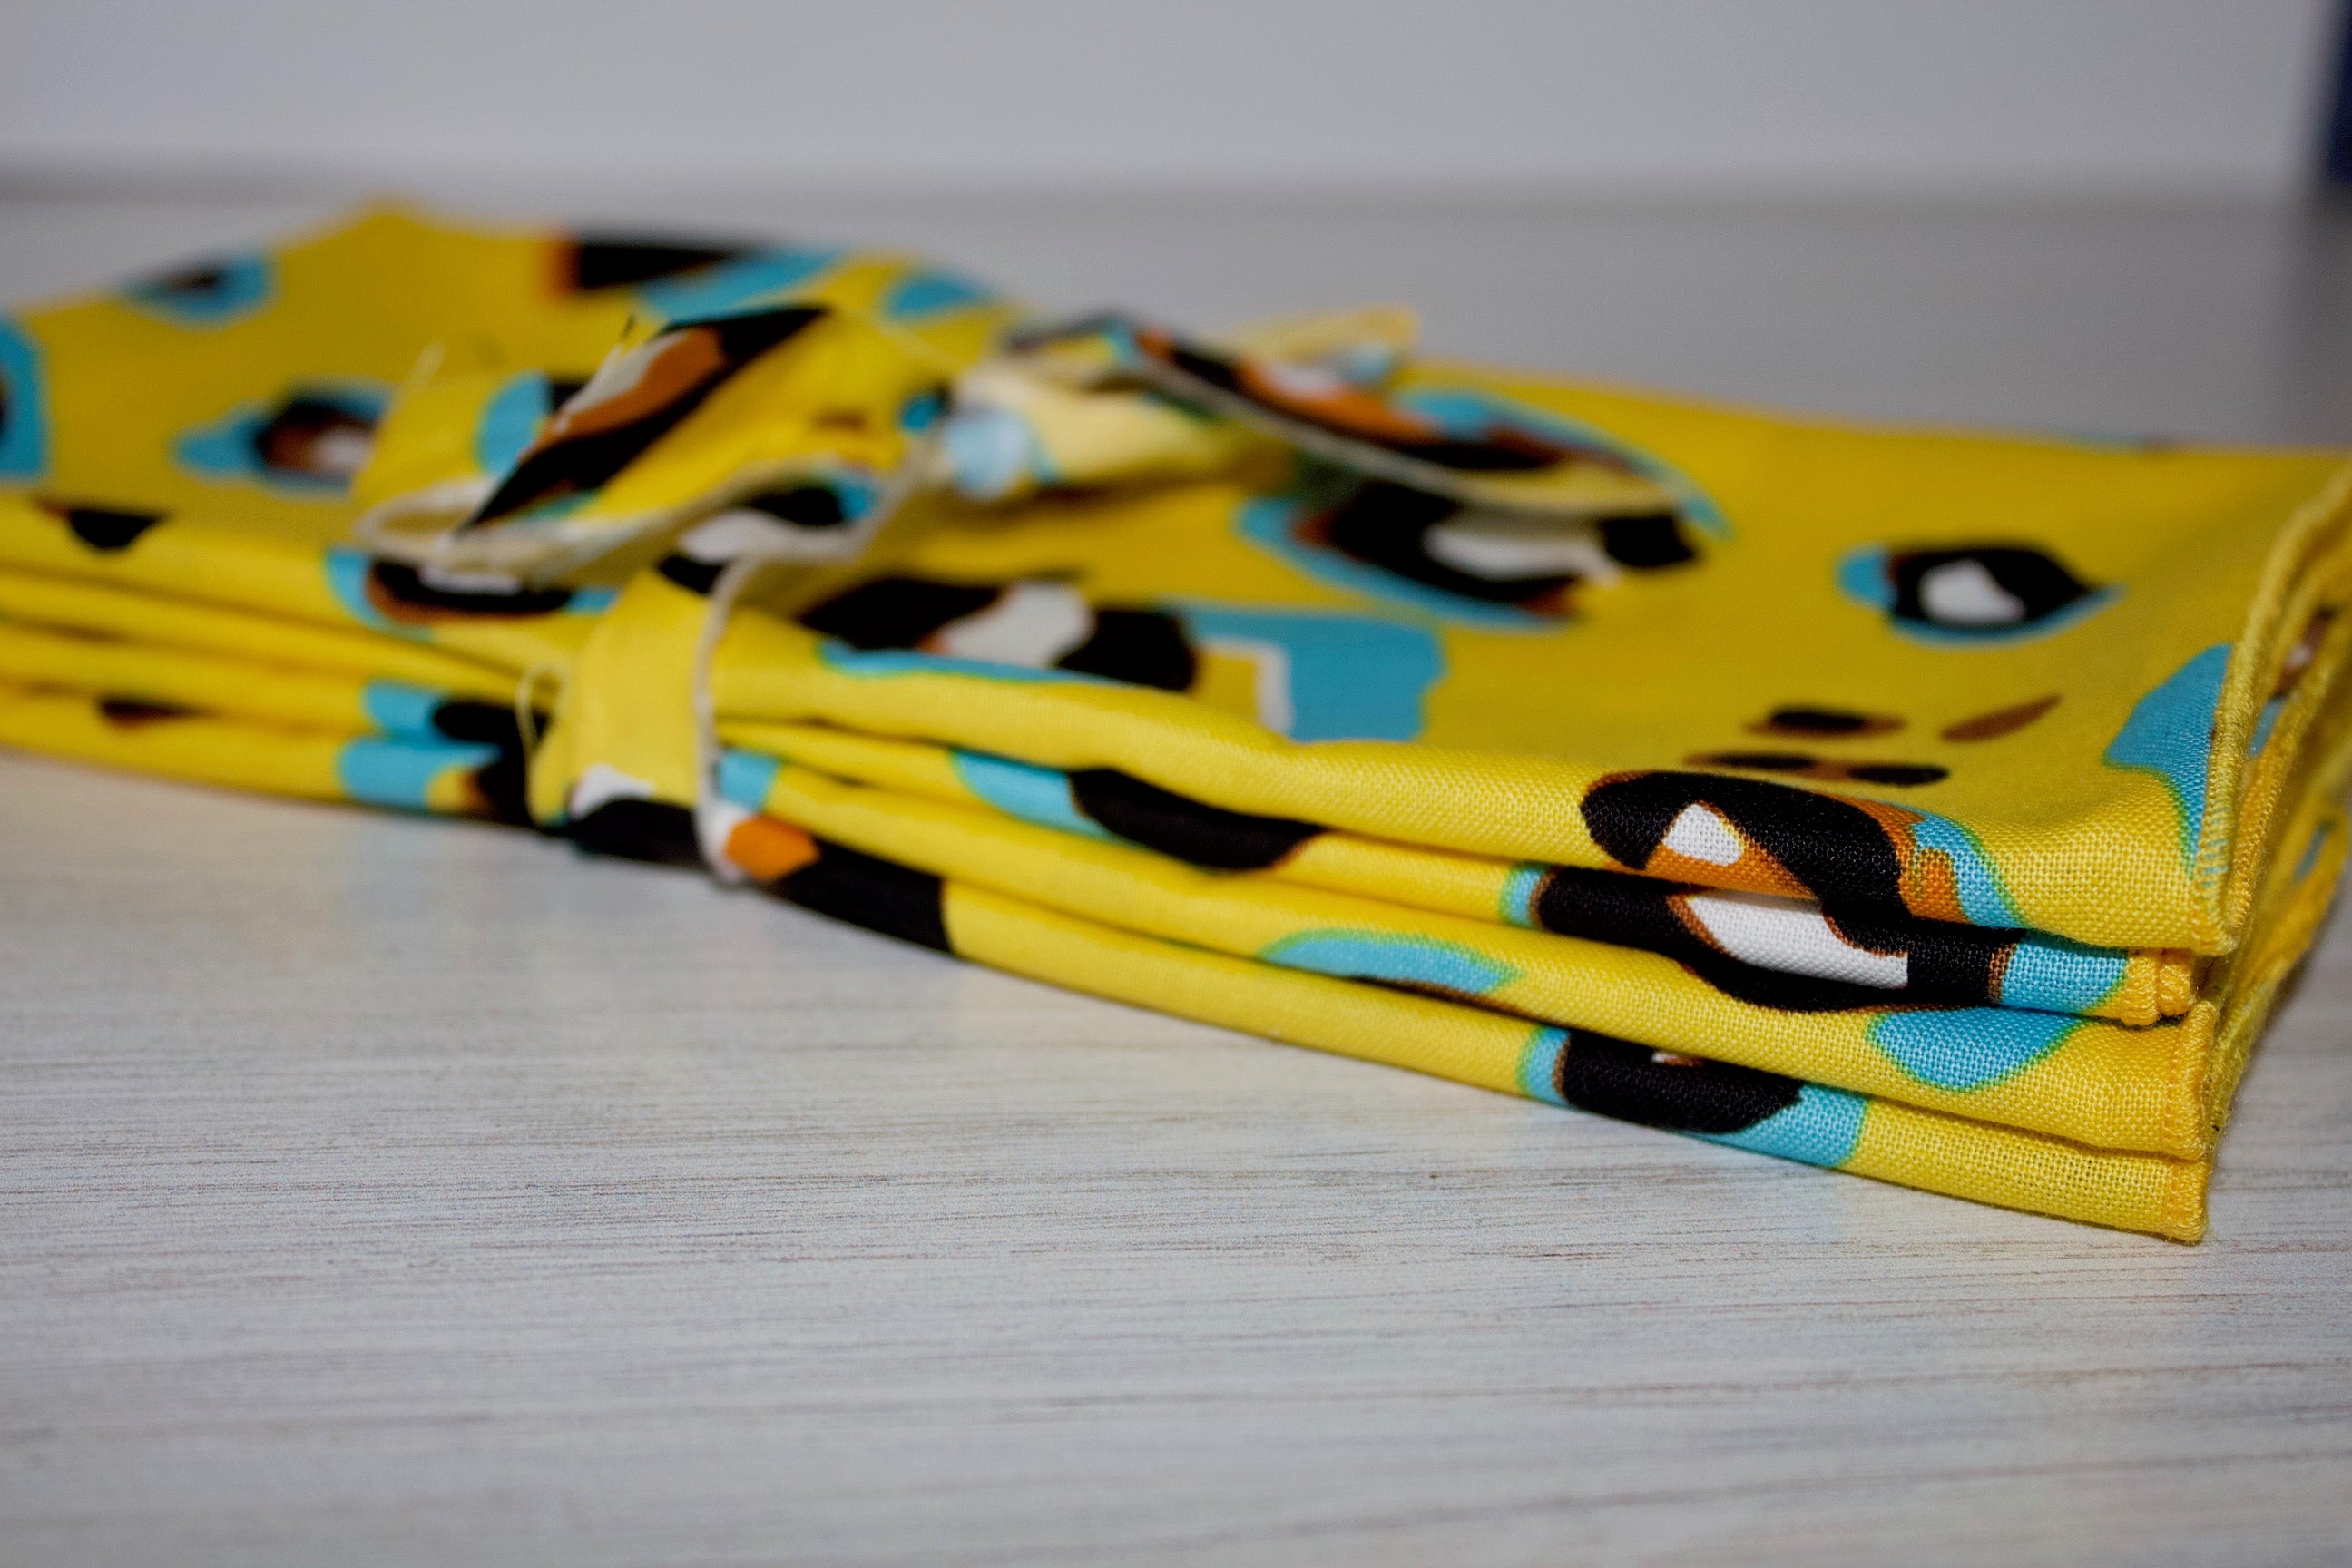 Spots Napkins - (Set of 4)-The Blue Peony-Category_Napkins,Category_Table Linens,Color_Black,Color_Yellow,Department_Kitchen,Material_Cotton,Pattern_Animal Print